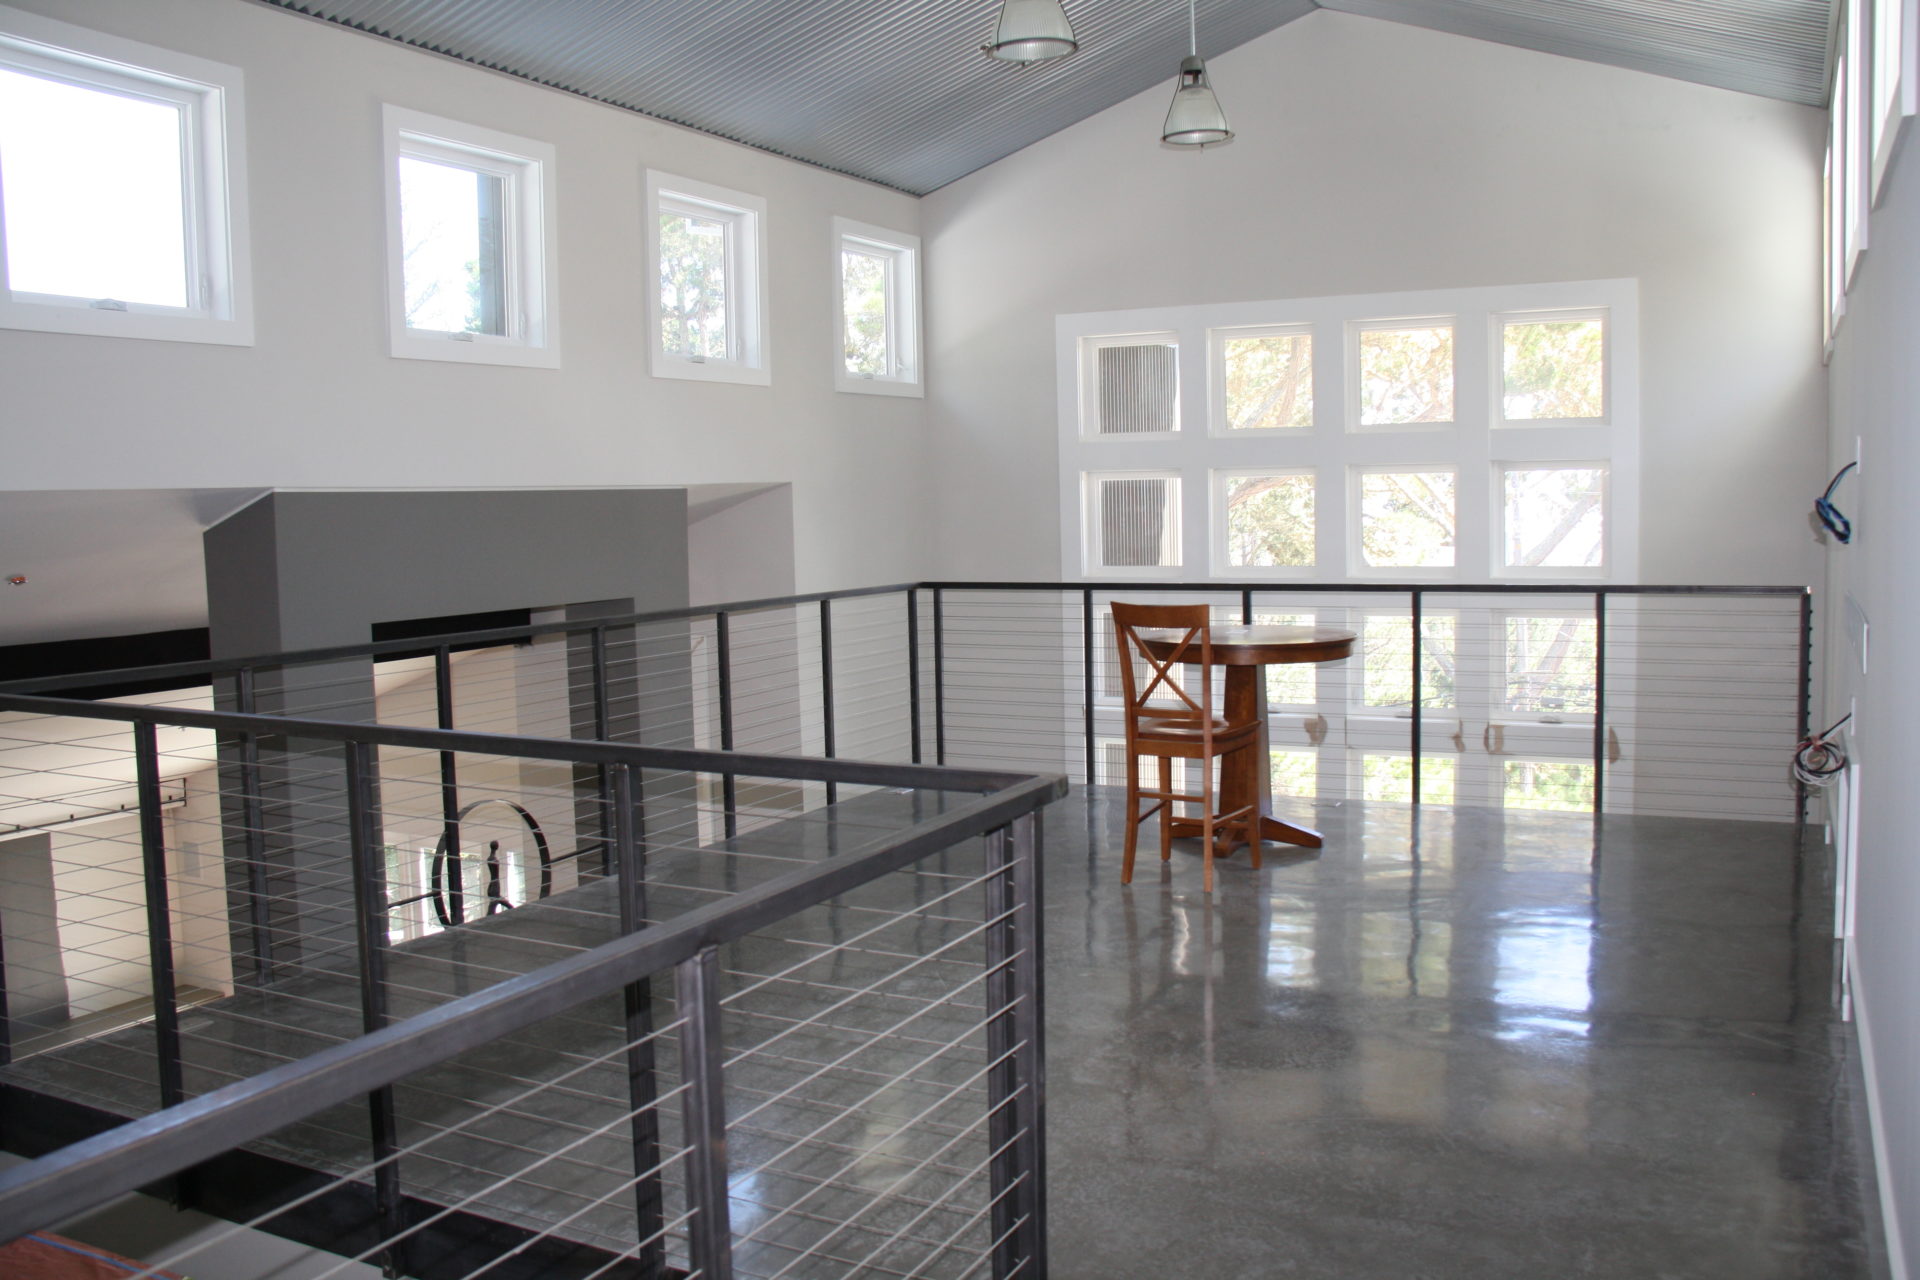 custom black metal railing installed to the top floor of a residential home in san mateo. House is white walled with black floor and coffee table in the center.